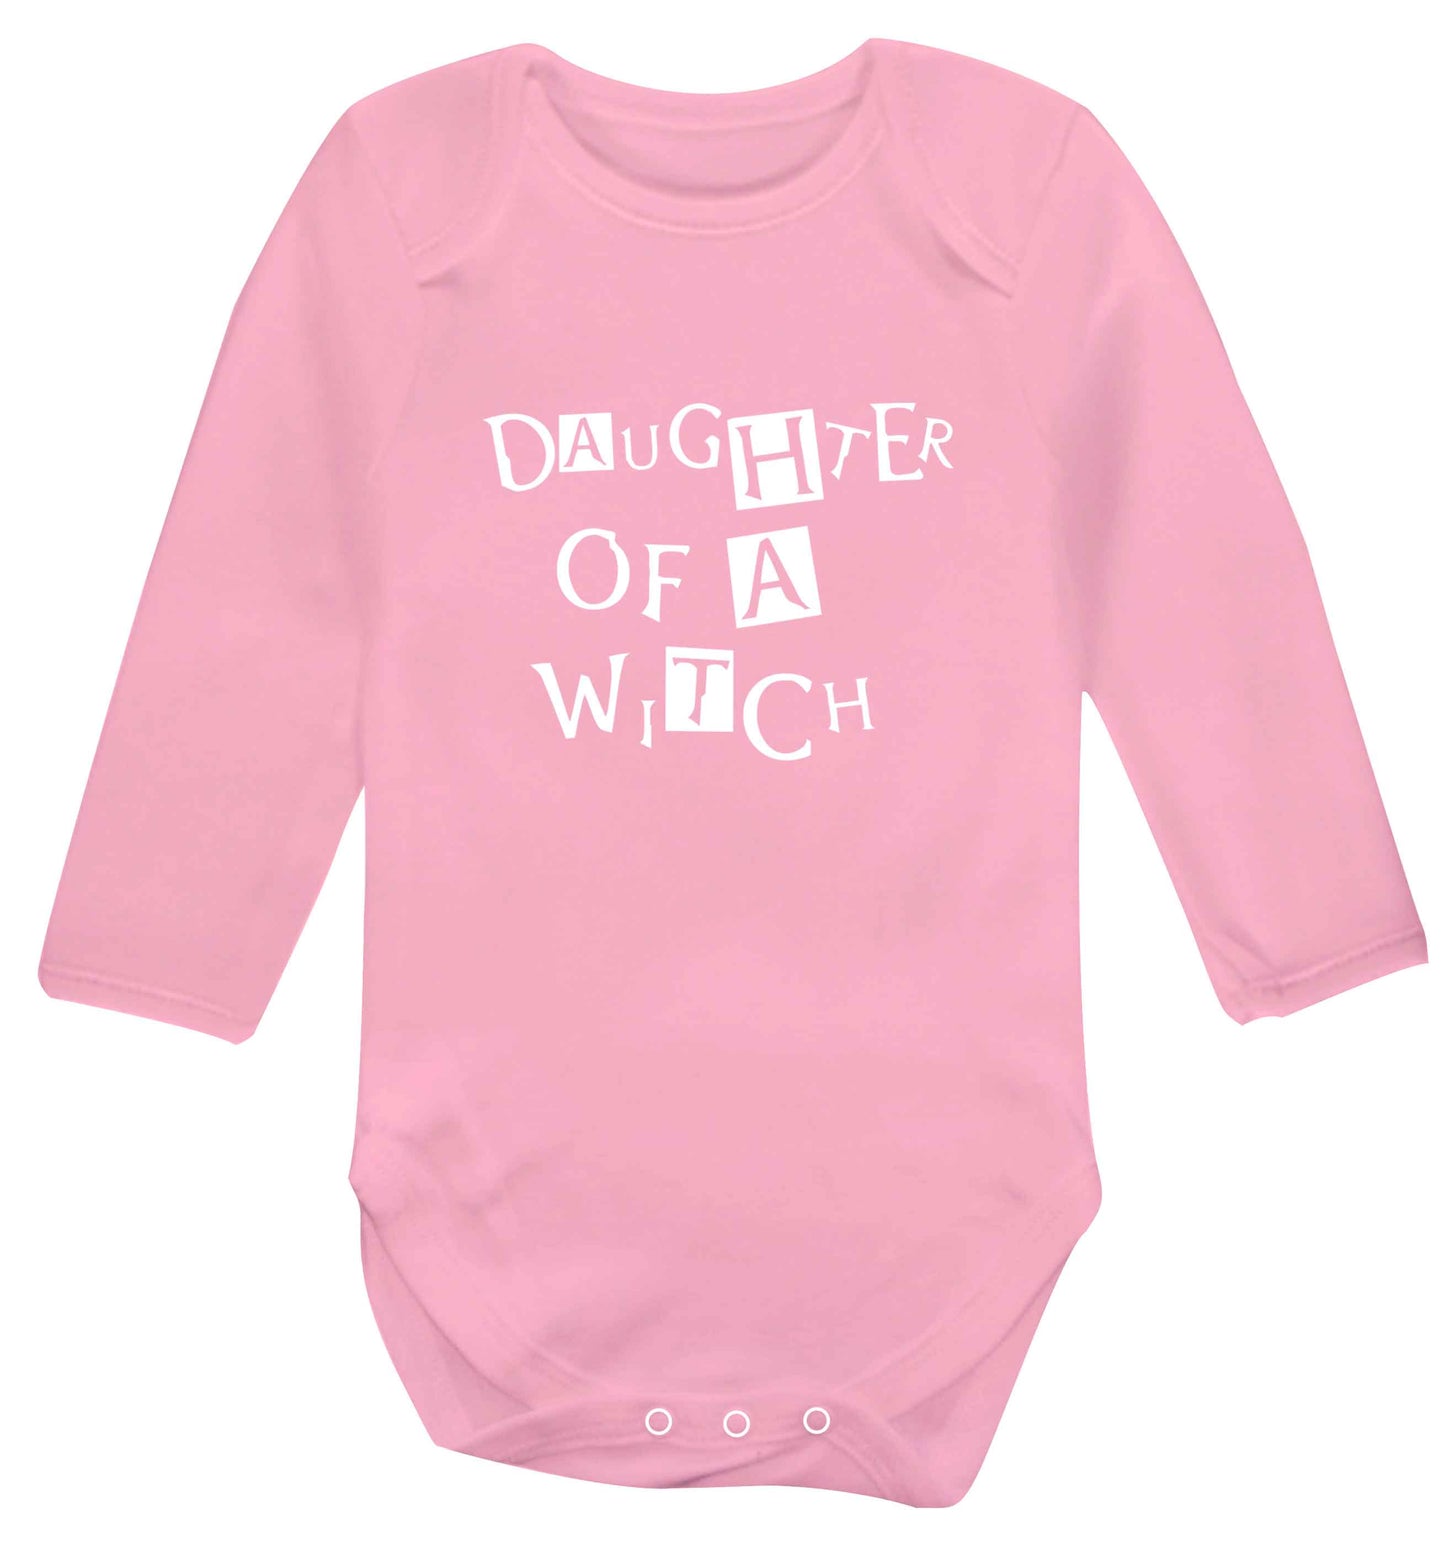 Daughter of a witch baby vest long sleeved pale pink 6-12 months